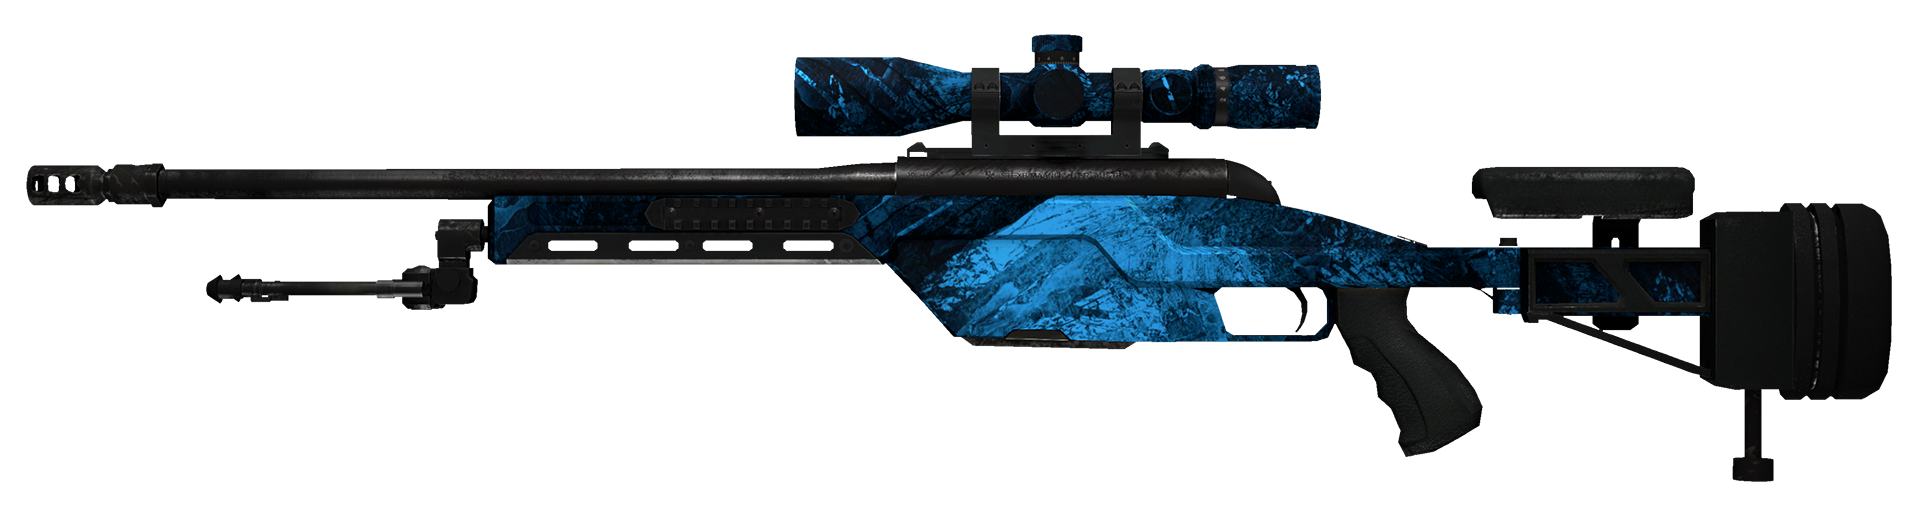 SSG 08 Abyss Large Rendering